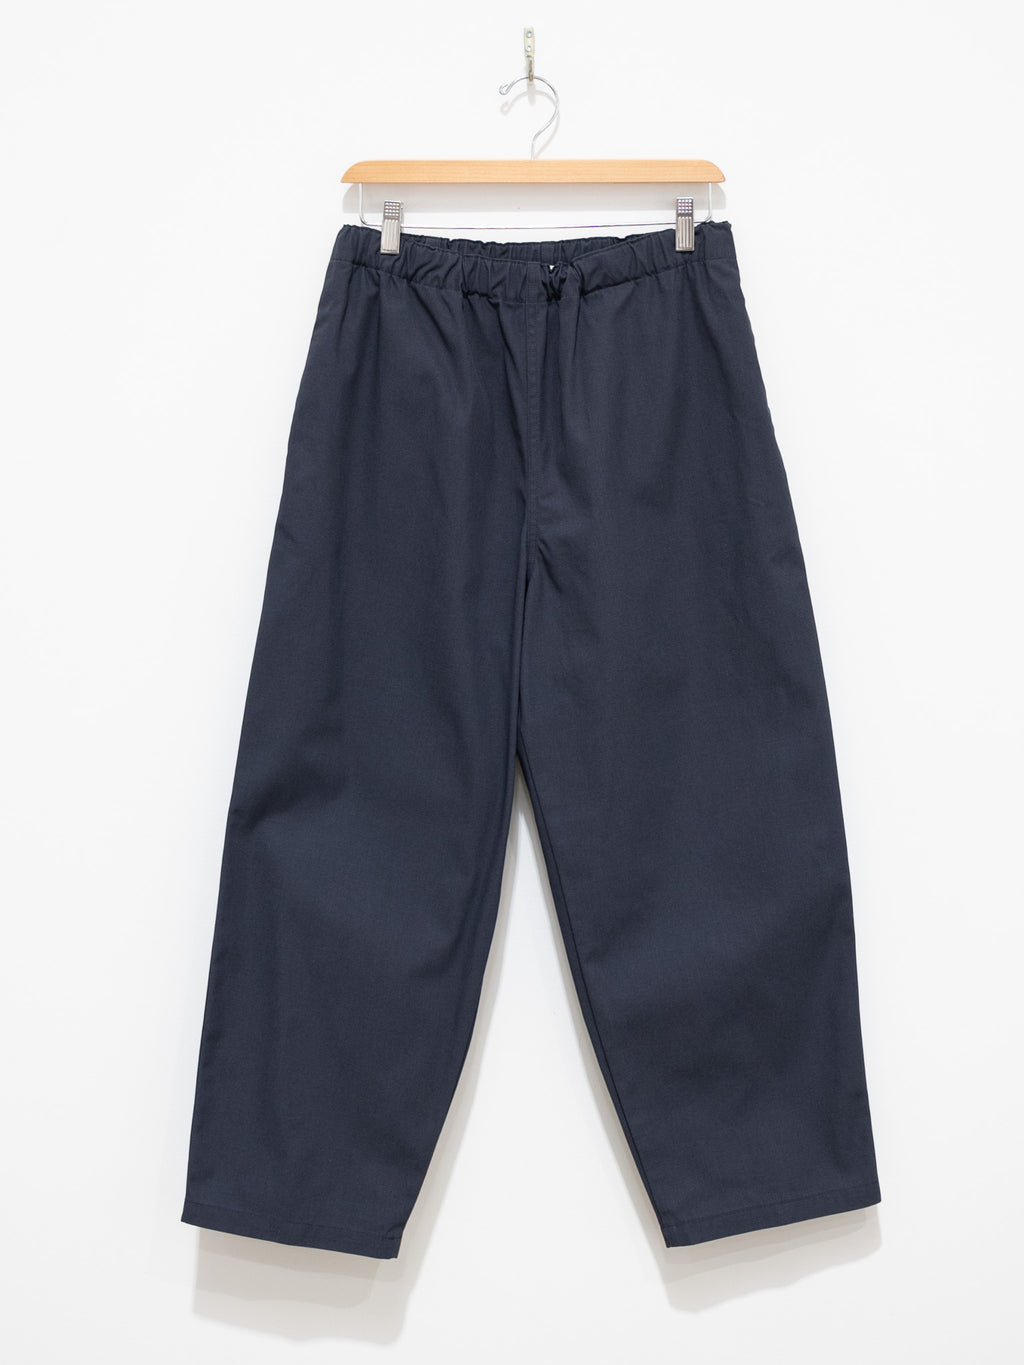 Namu Shop - Y Organic Cotton Recycle Poly Twill Tapered Easy Trousers - Navy